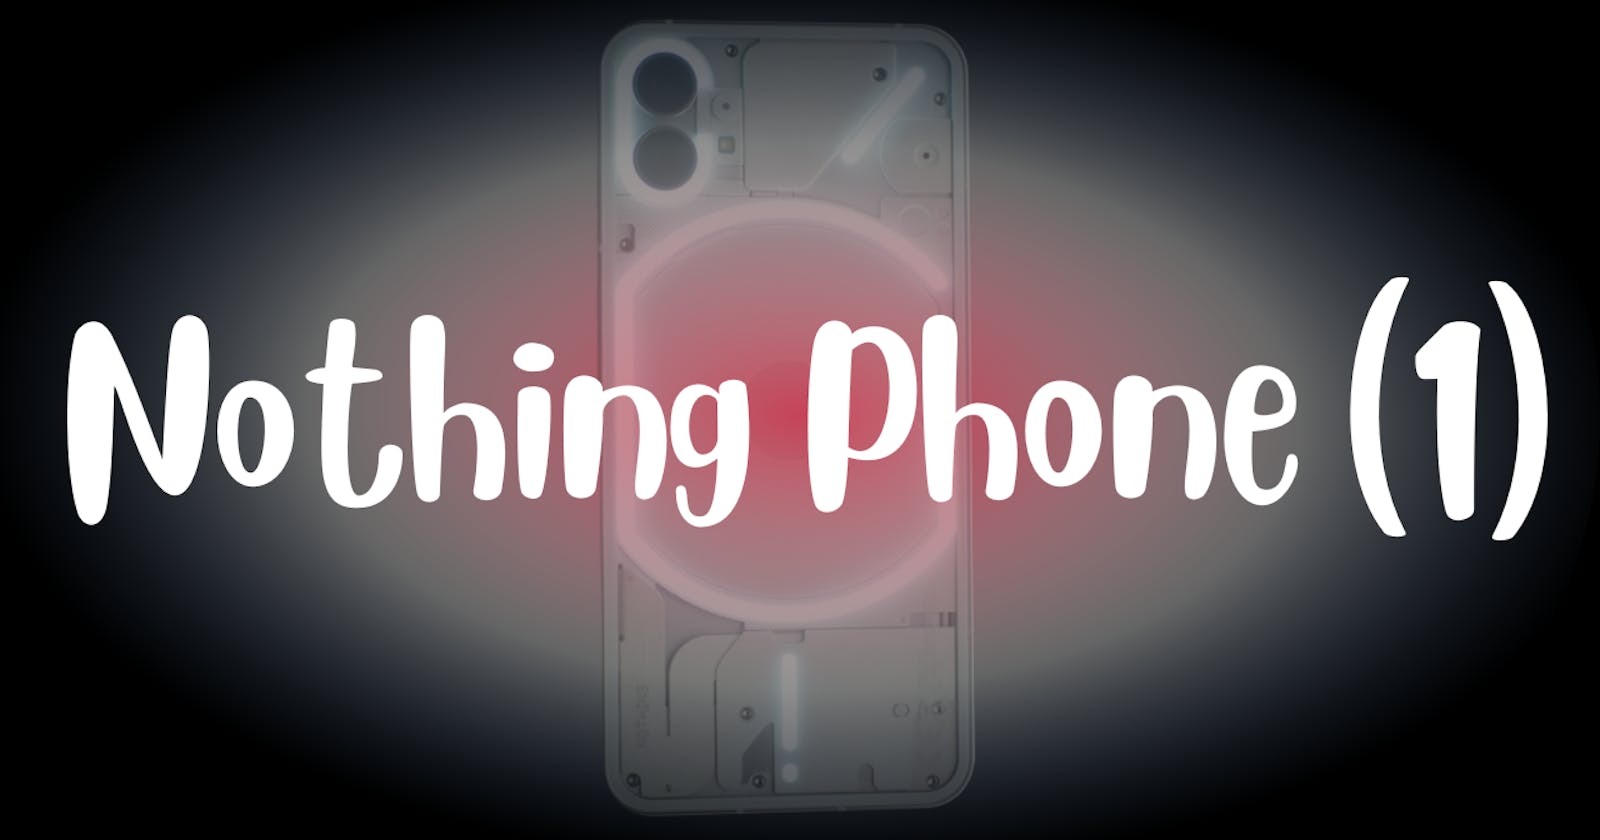 Nothing Phone (1): Features & Specs